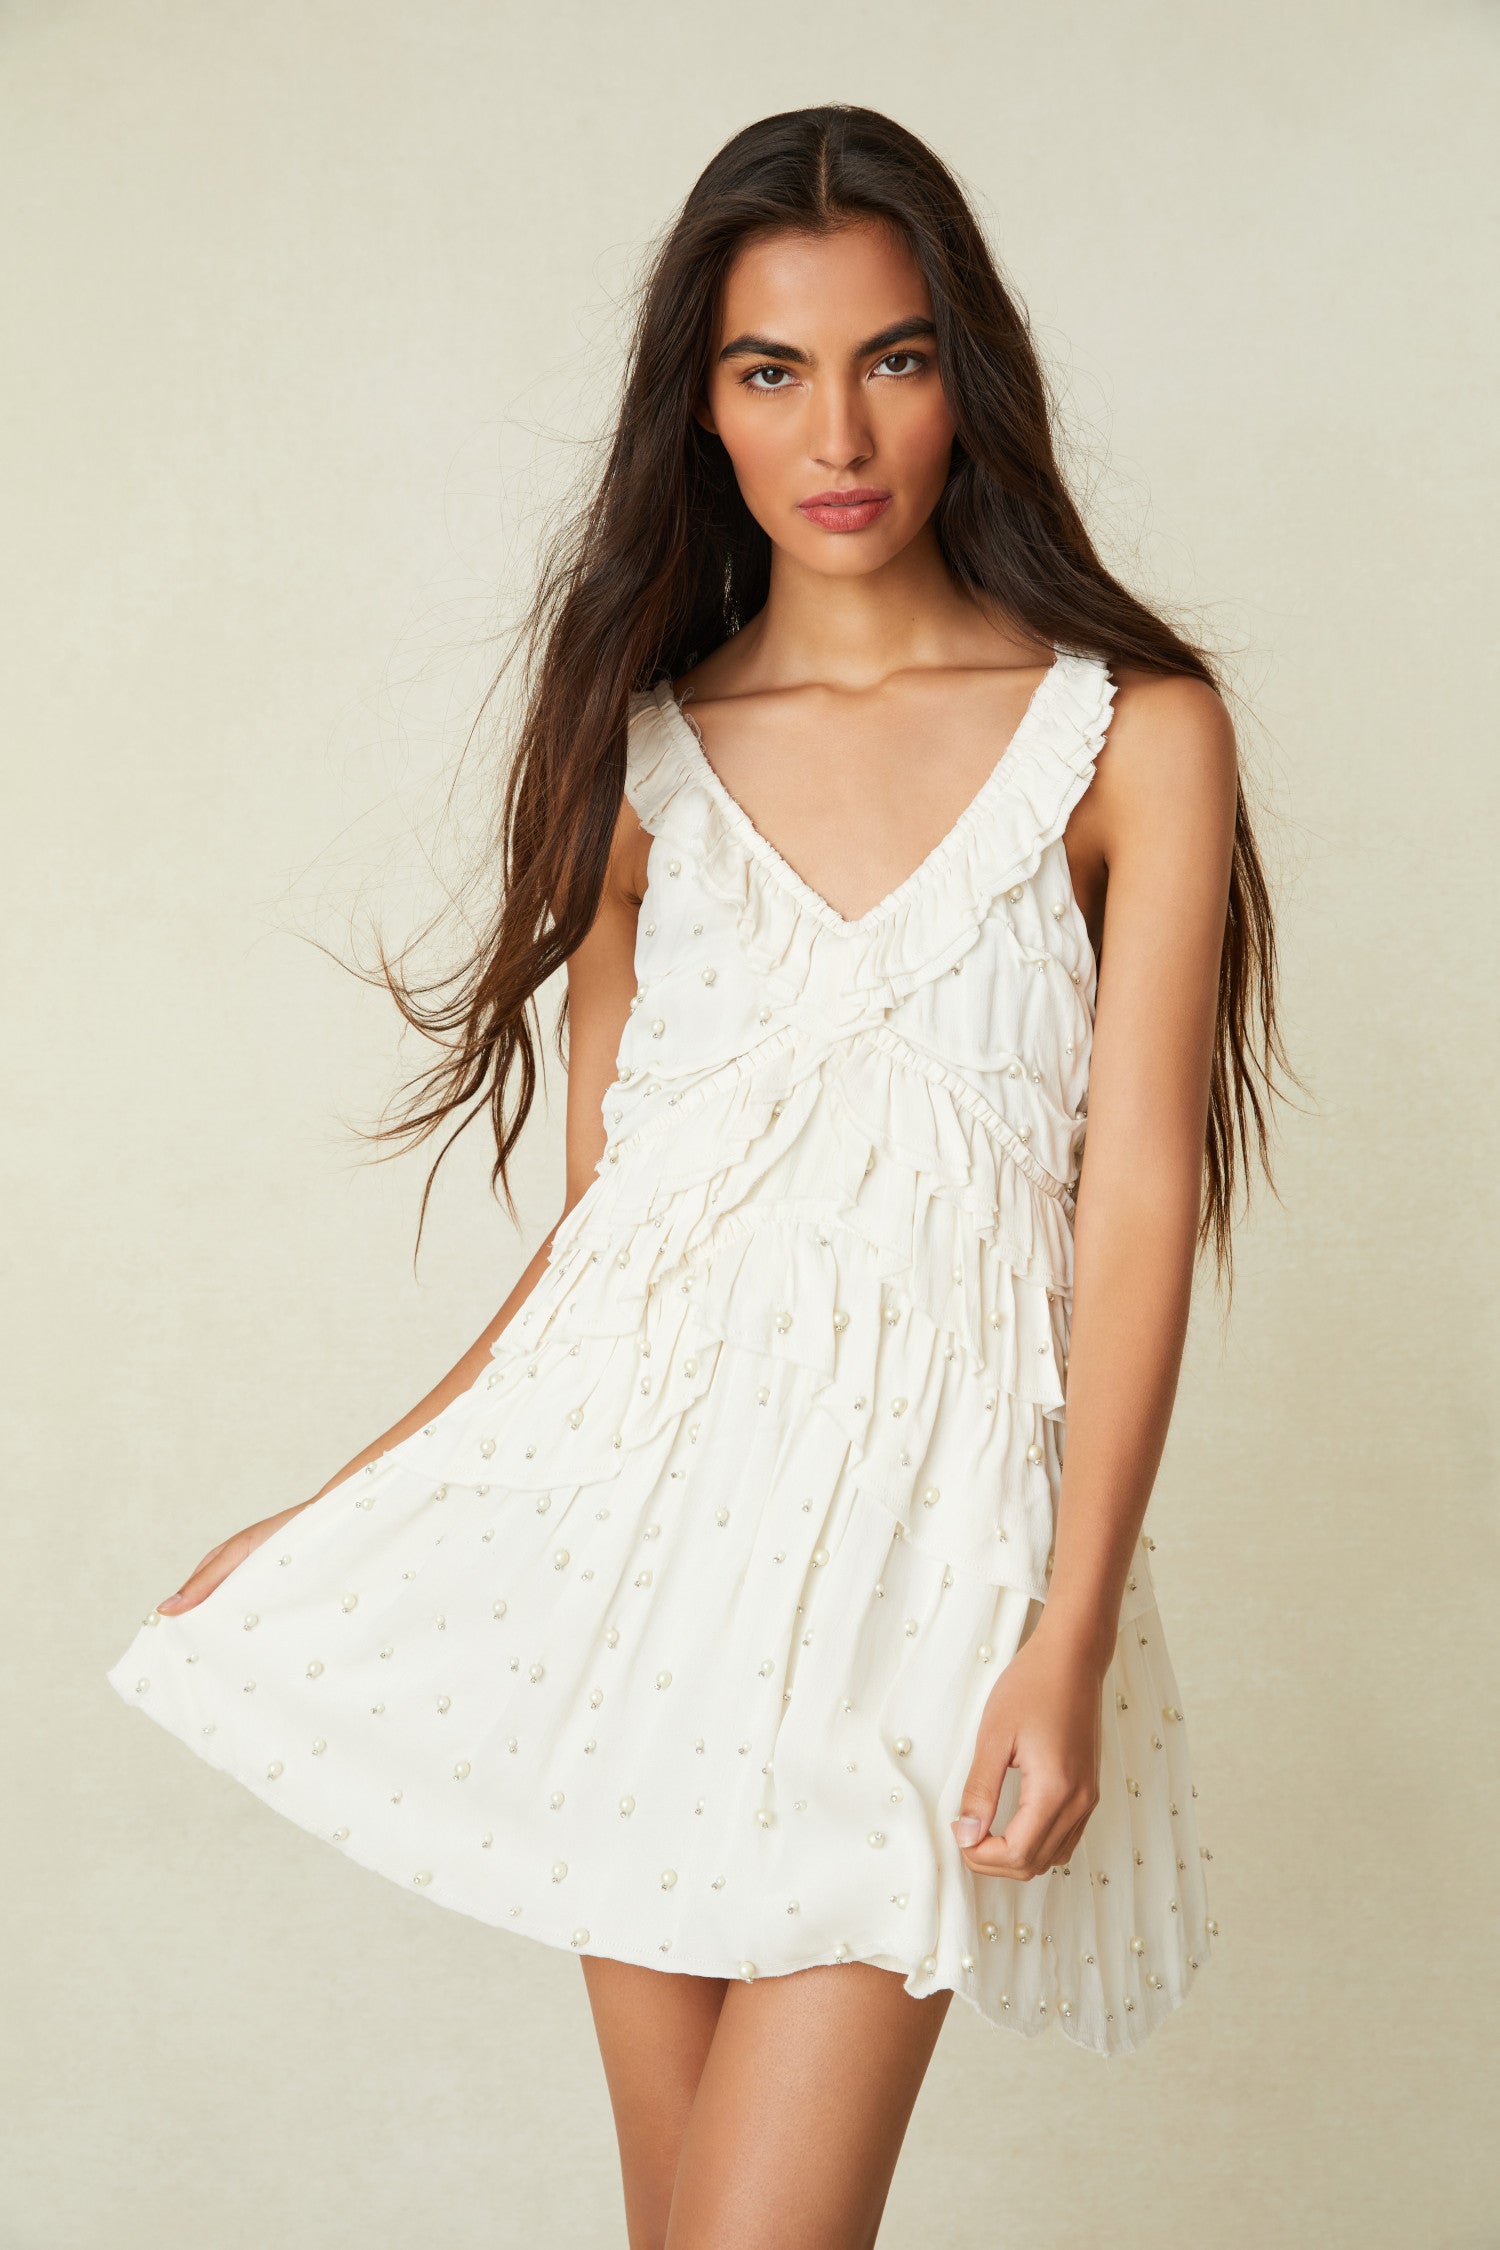 White Mini Dress This must-have mini is all hand-beaded with iridescent pearls fastened by crystal prongs on a soft polyester satin fabric. The dress begins with a low, round neckline that falls to tiers of ruffles with asymmetrical zipper.